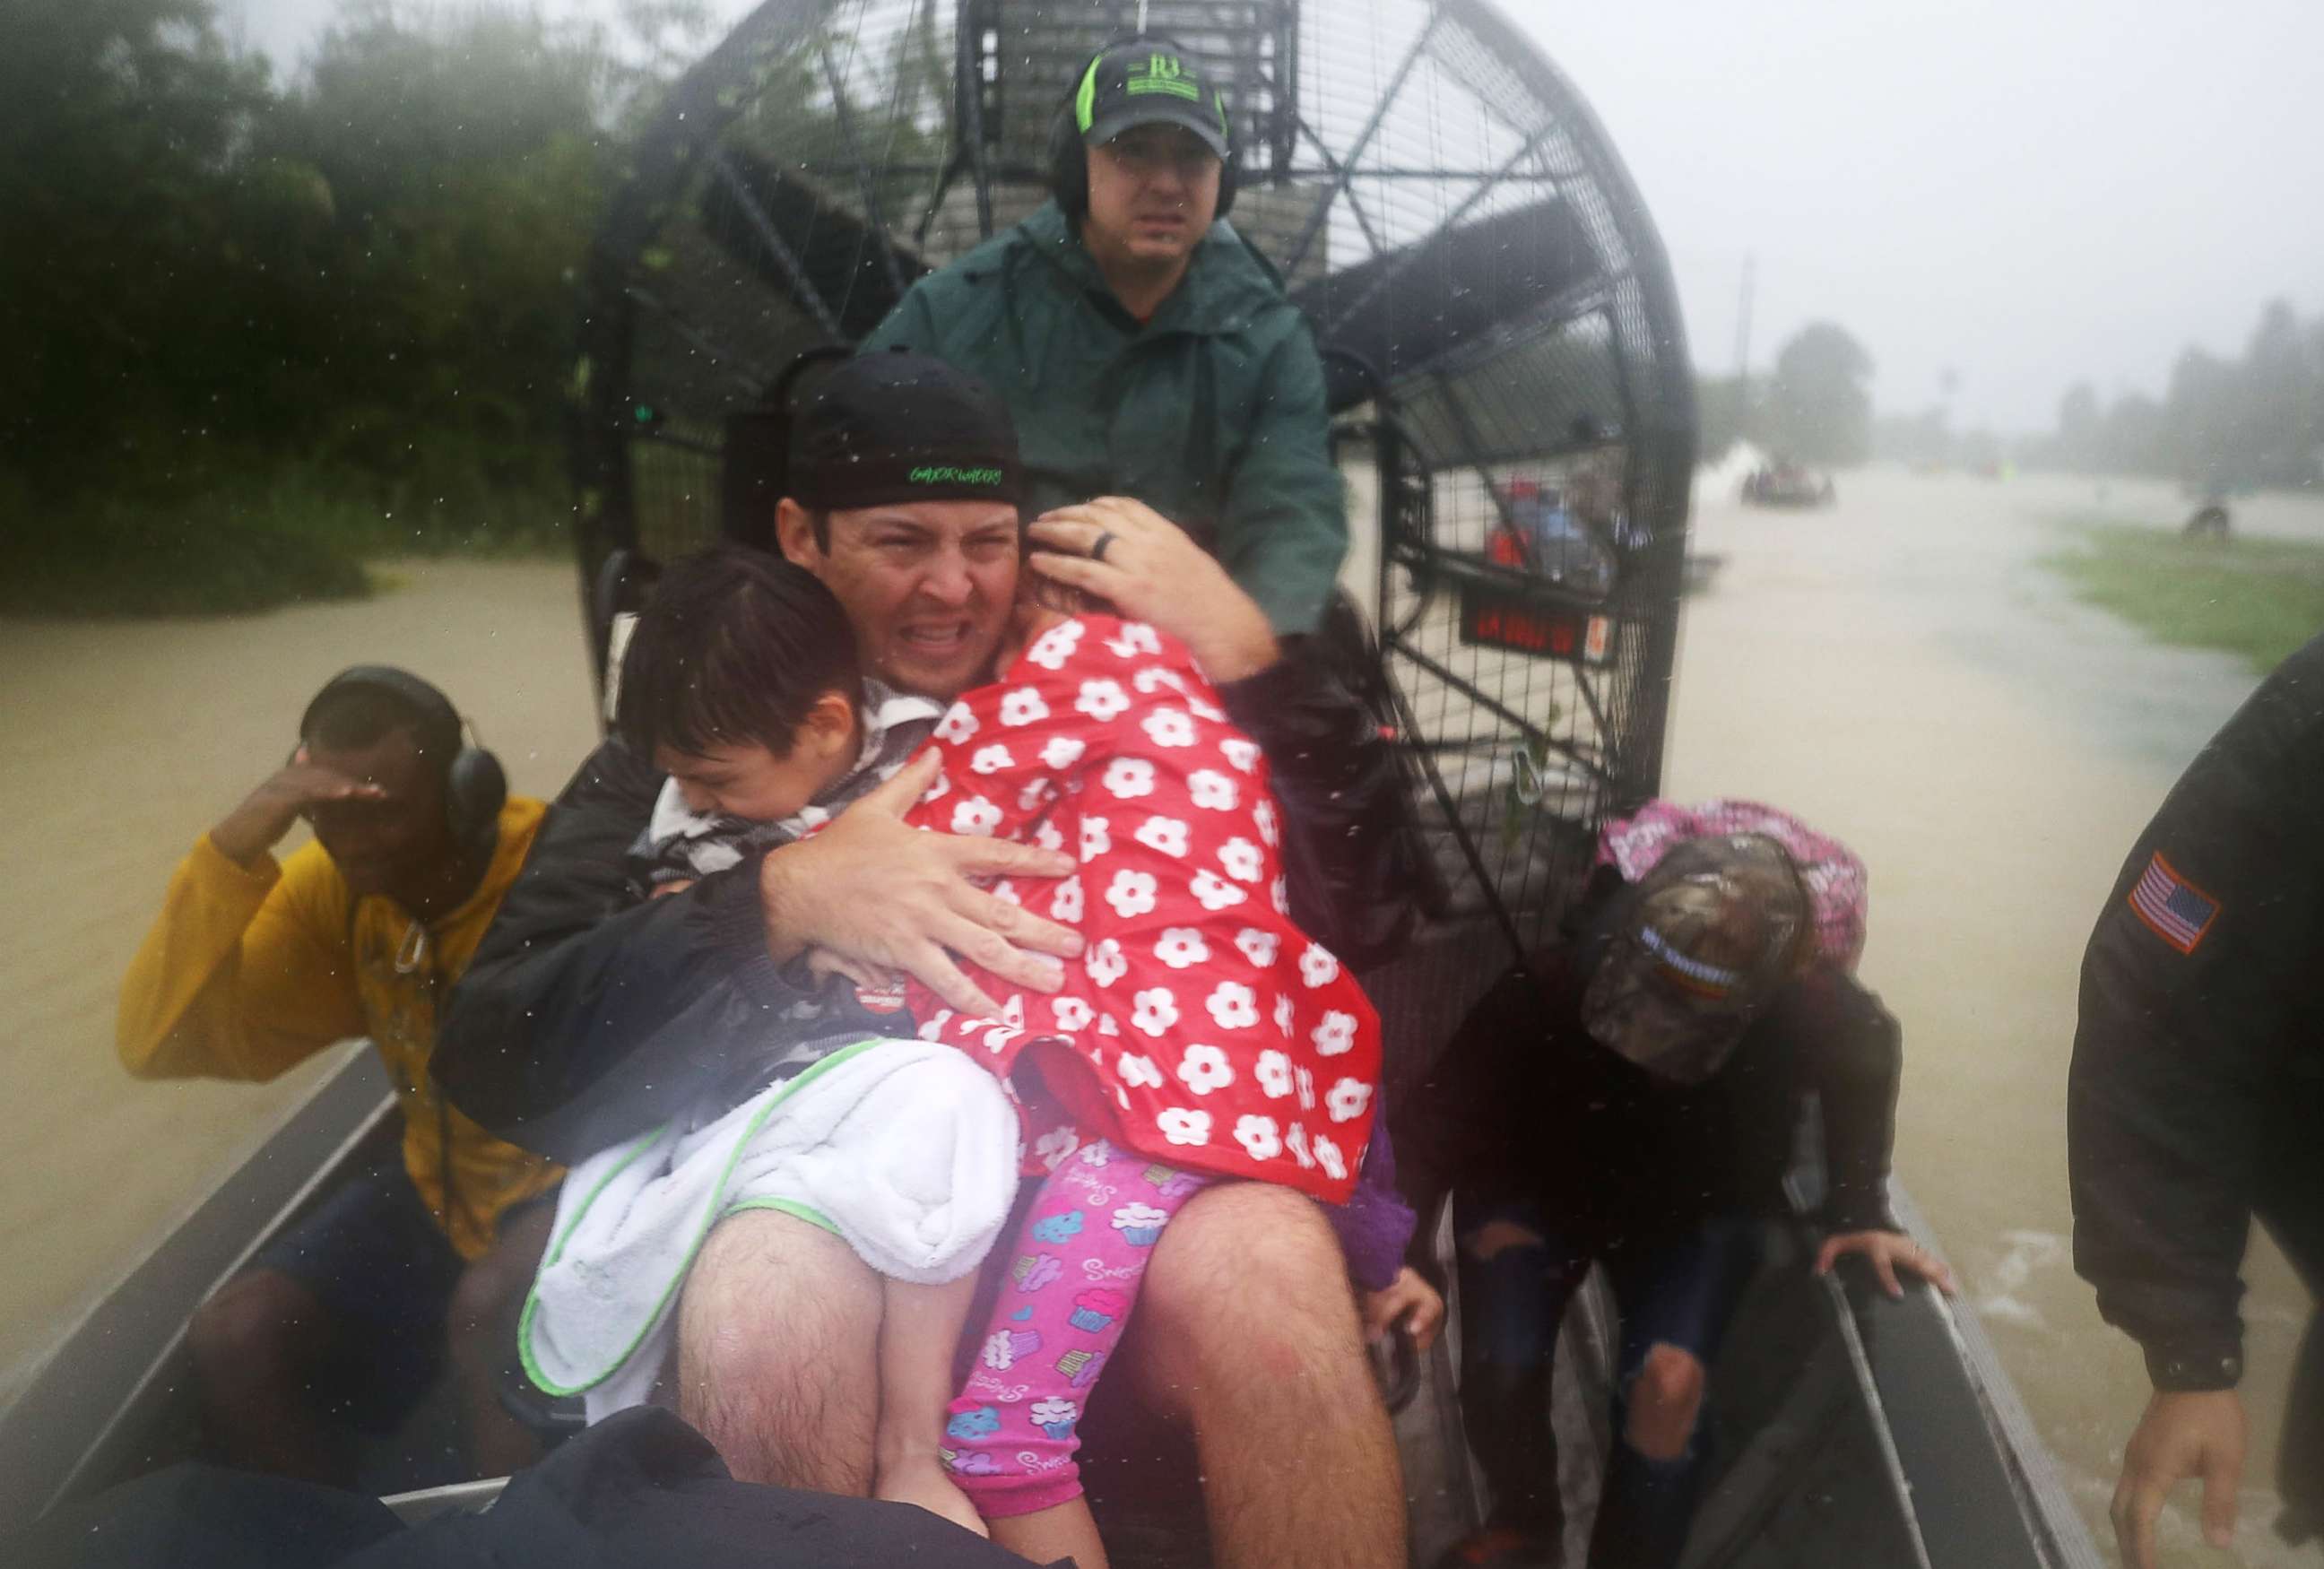 PHOTO: Rescuers use an airboat to rescue people from homes that are inundated with flooding from Hurricane Harvey on Aug. 28, 2017 in Houston.